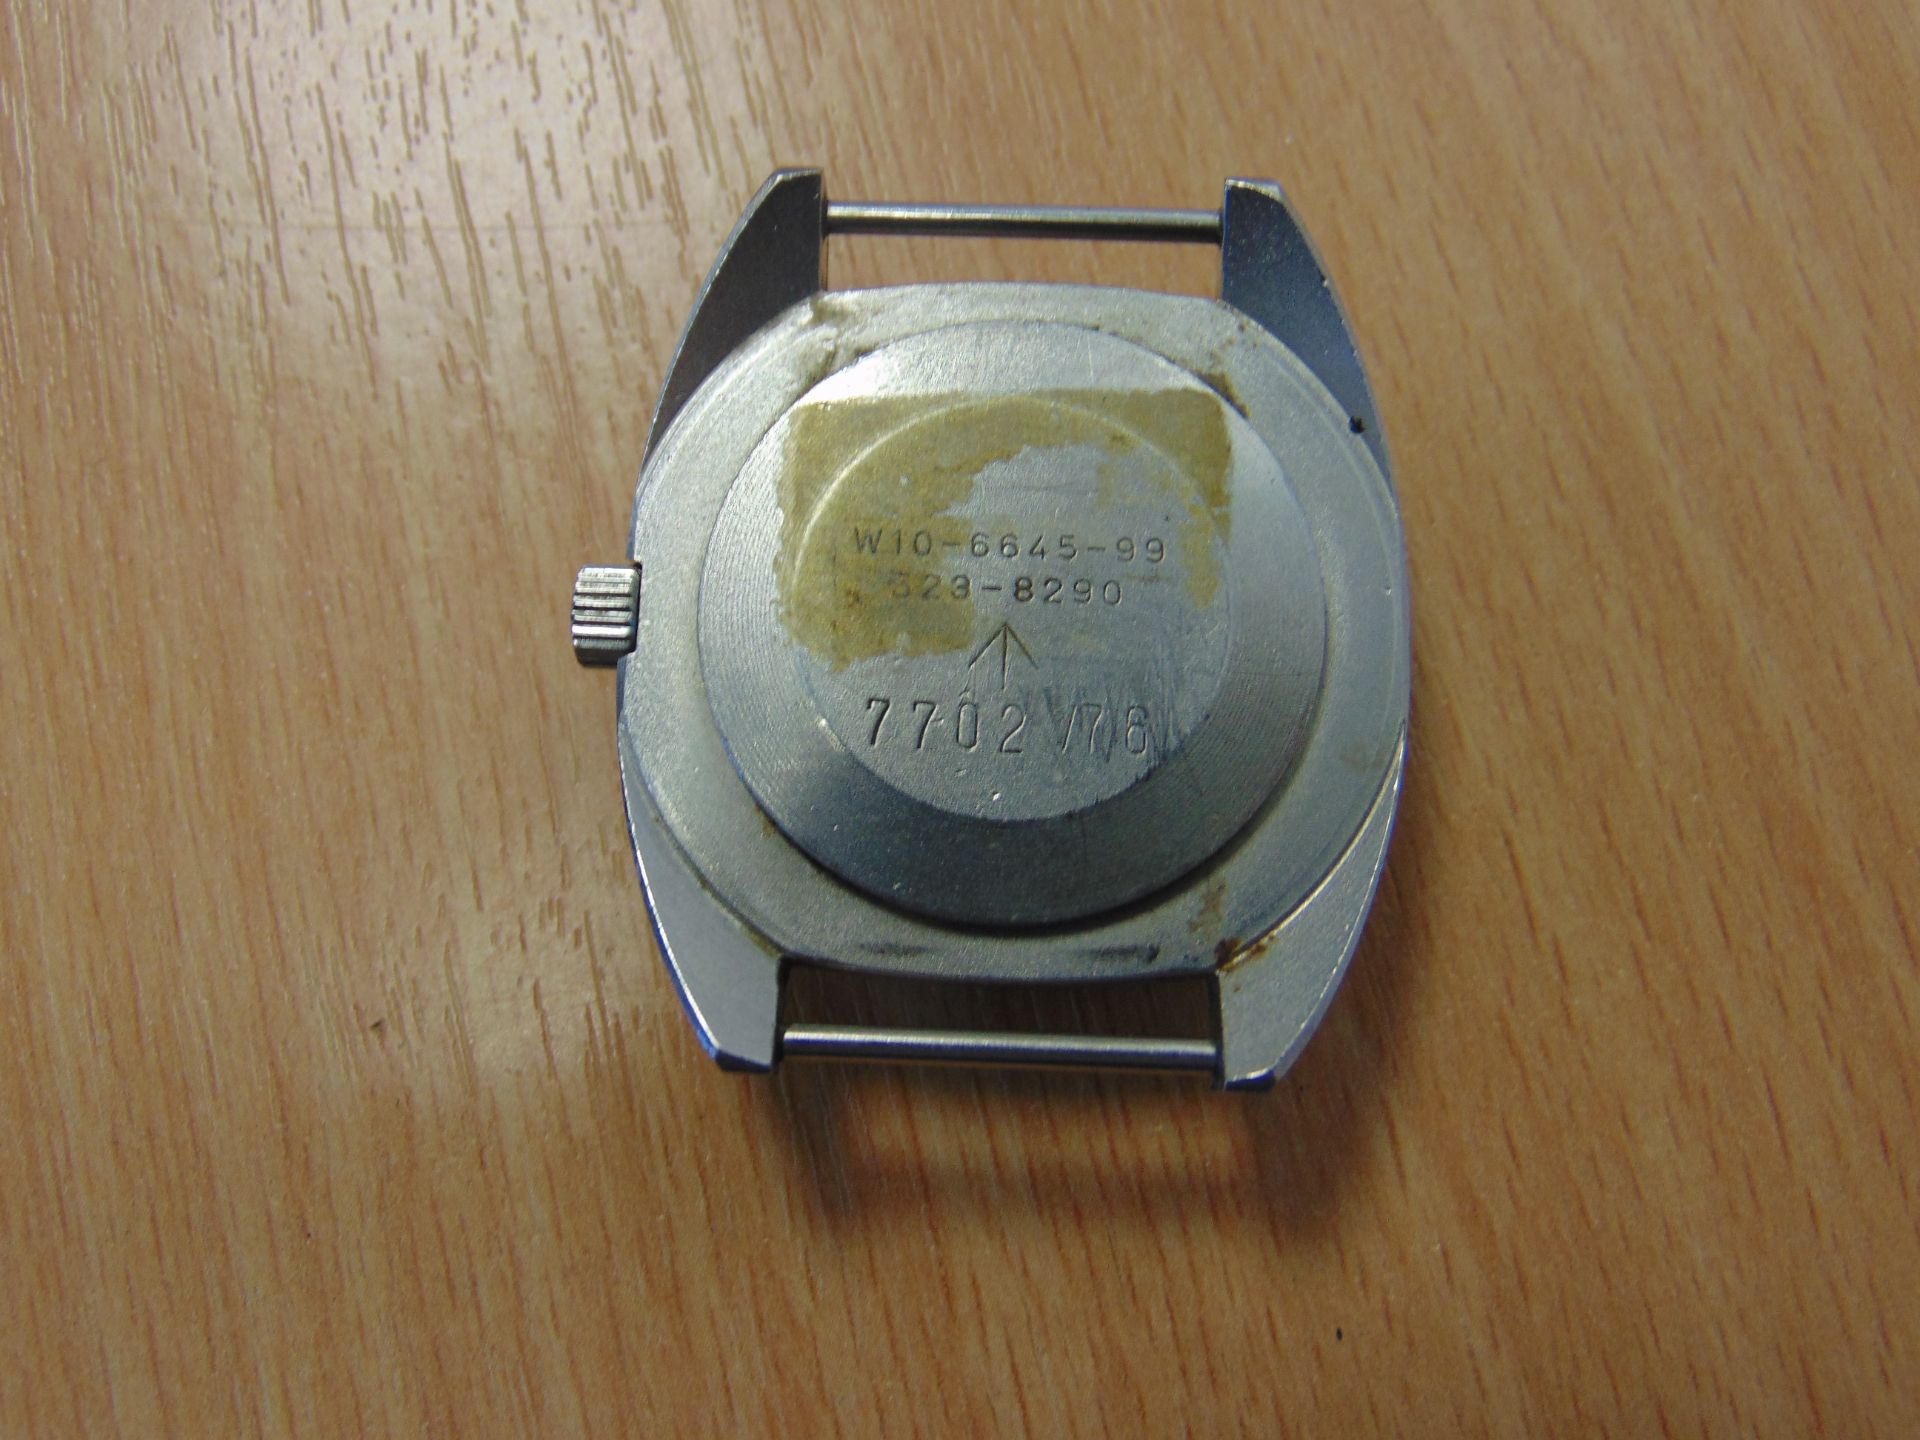 VERY RARE CWC MECHANICAL W10 SERVICE WATCH NATO MARKED - BROAD ARROW DATED 1976 - Image 7 of 10